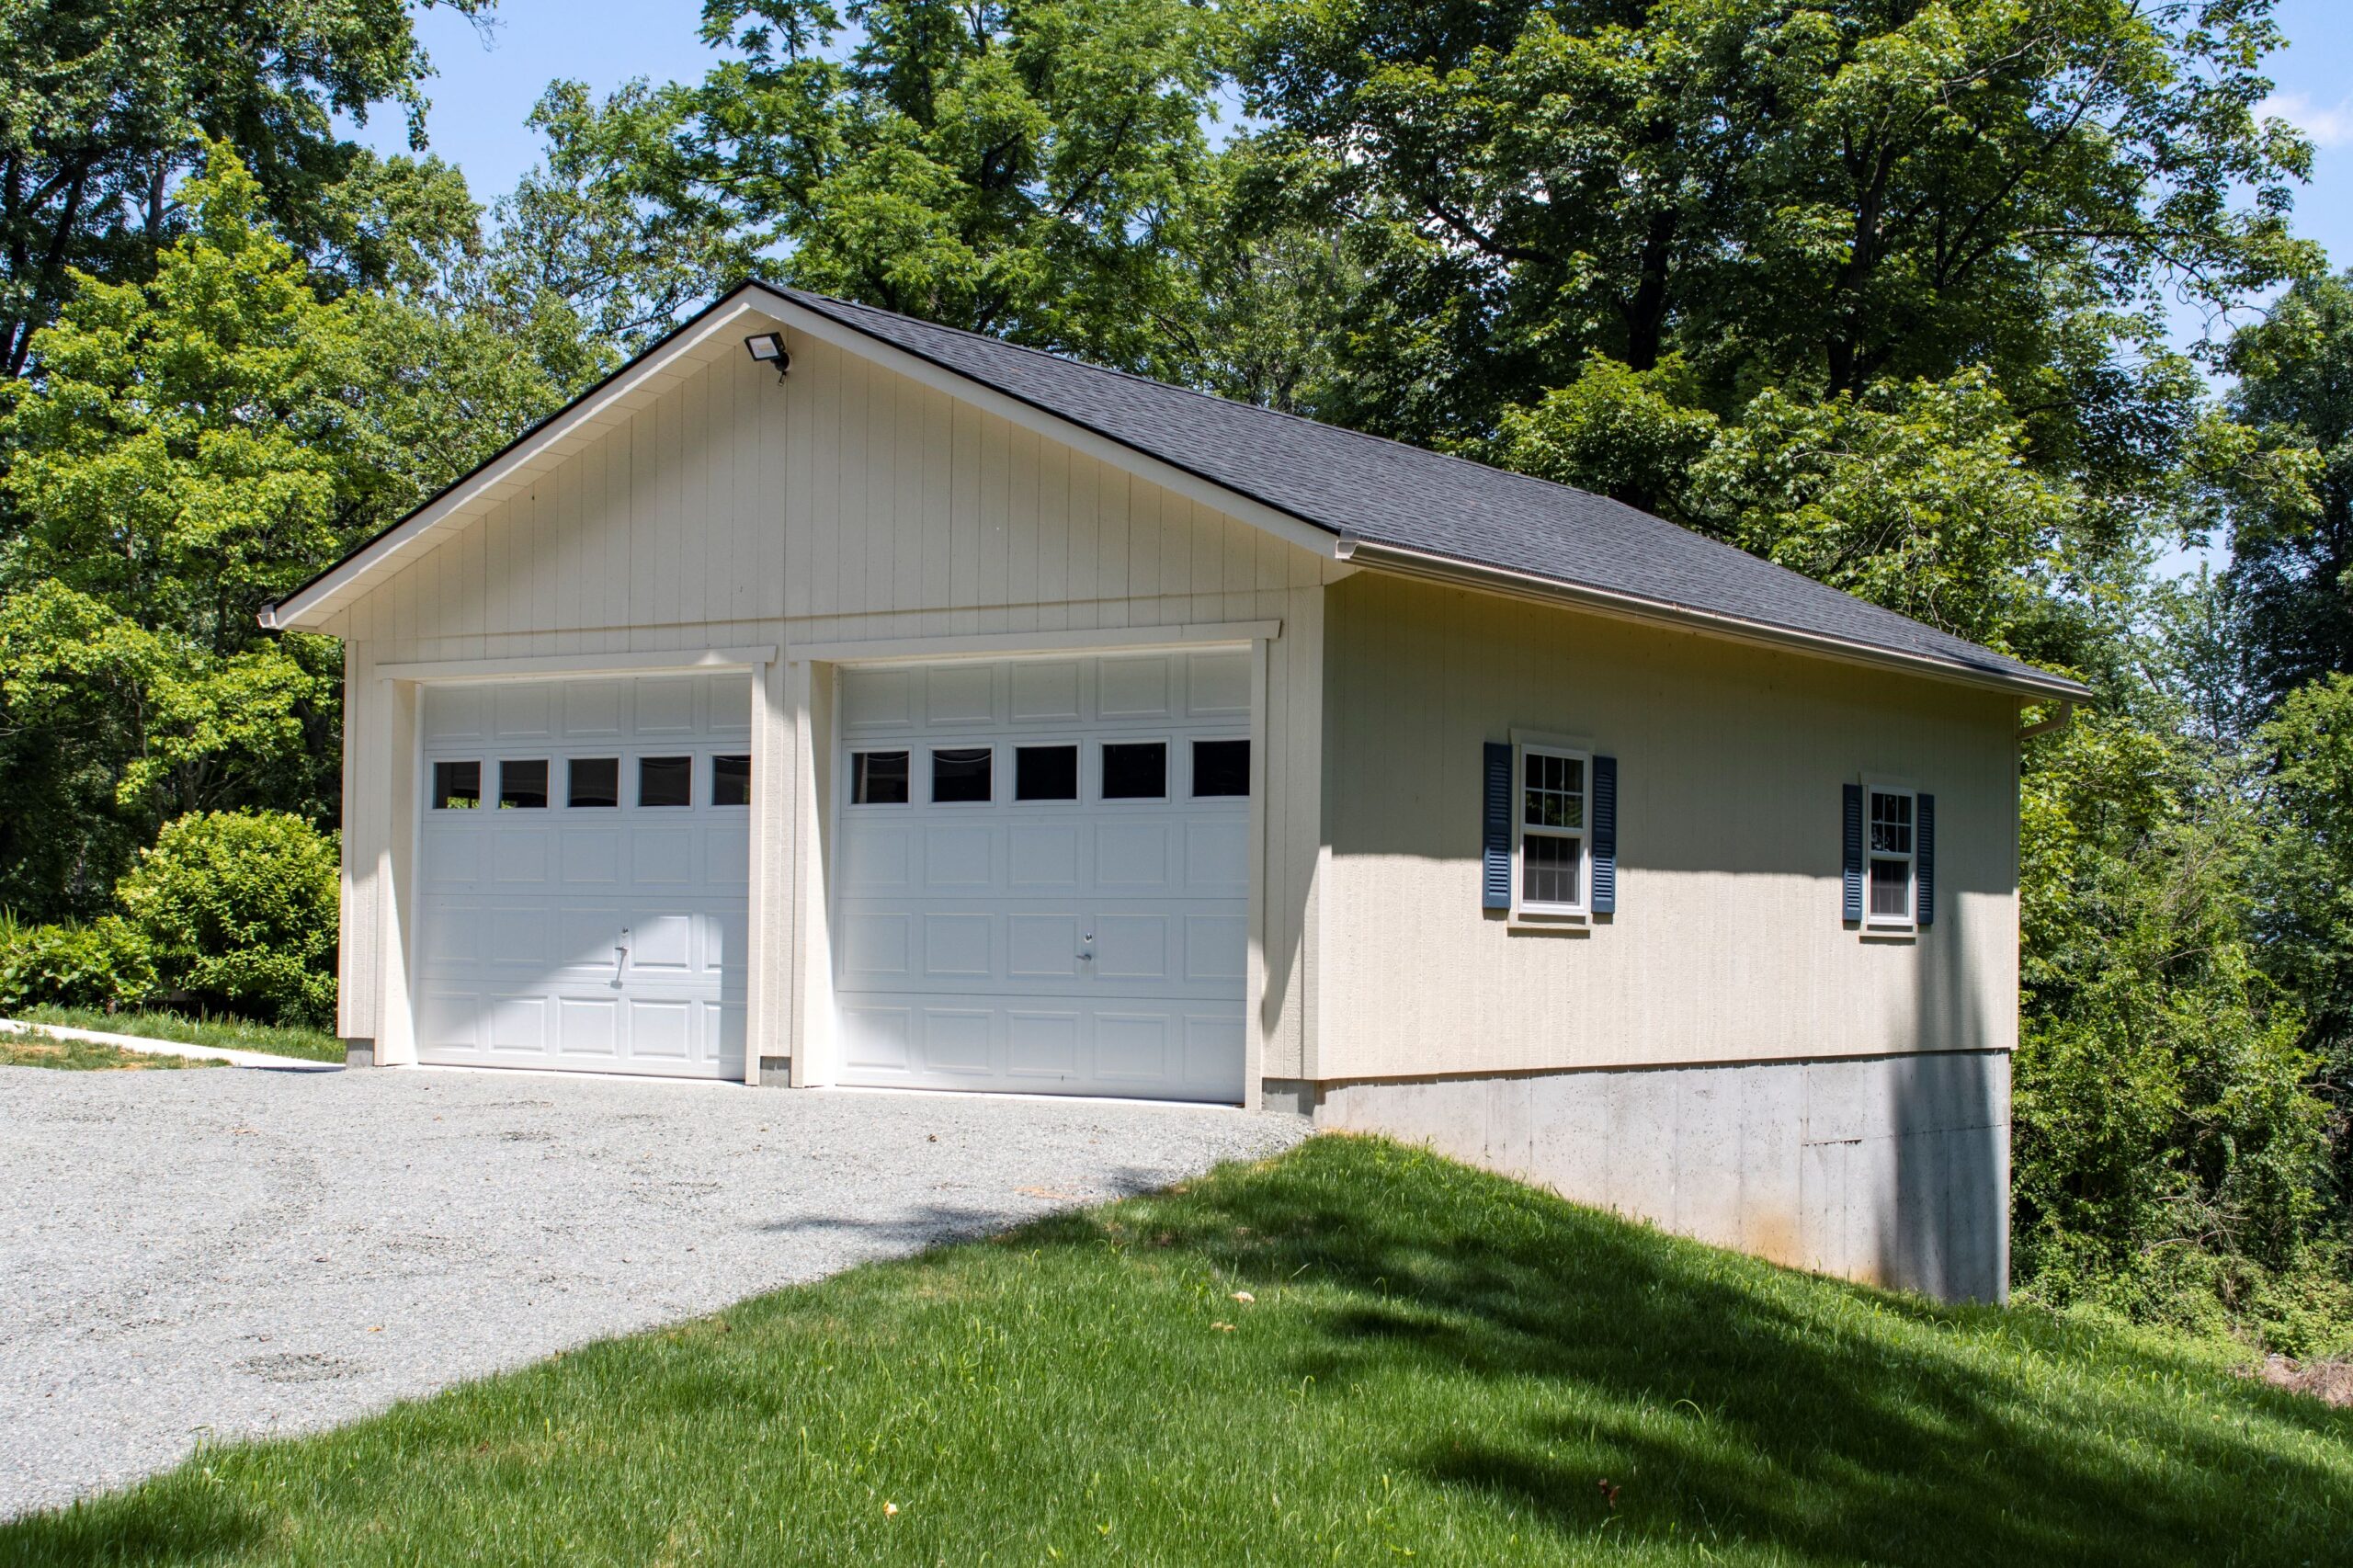 Exterior of a 1-story 2-car Richmond Garage with beige siding and 2 white garage doors.